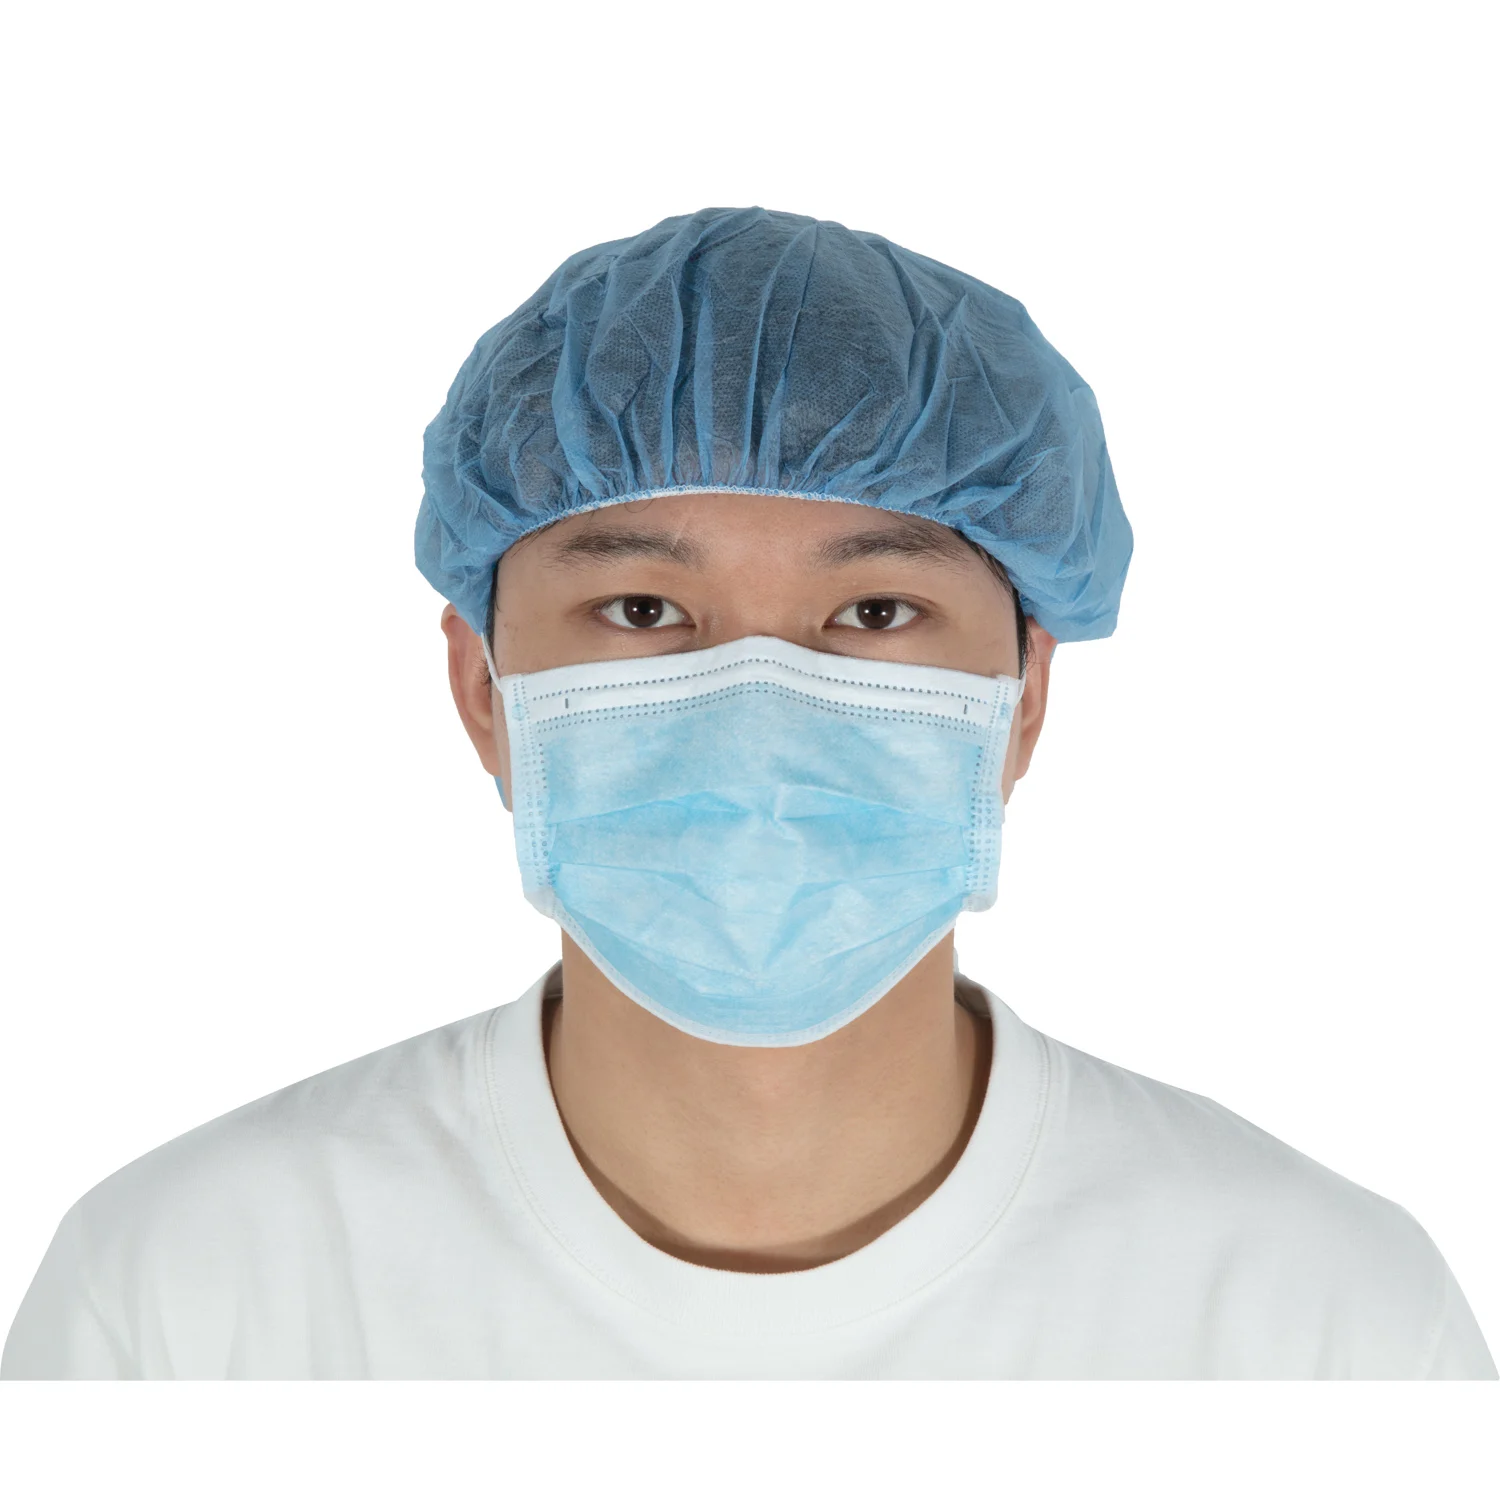 SMS 27GSM  Doctor Nurse Surgeon Surgical Use Universal Nonwoven Disposable  Bouffant Cap